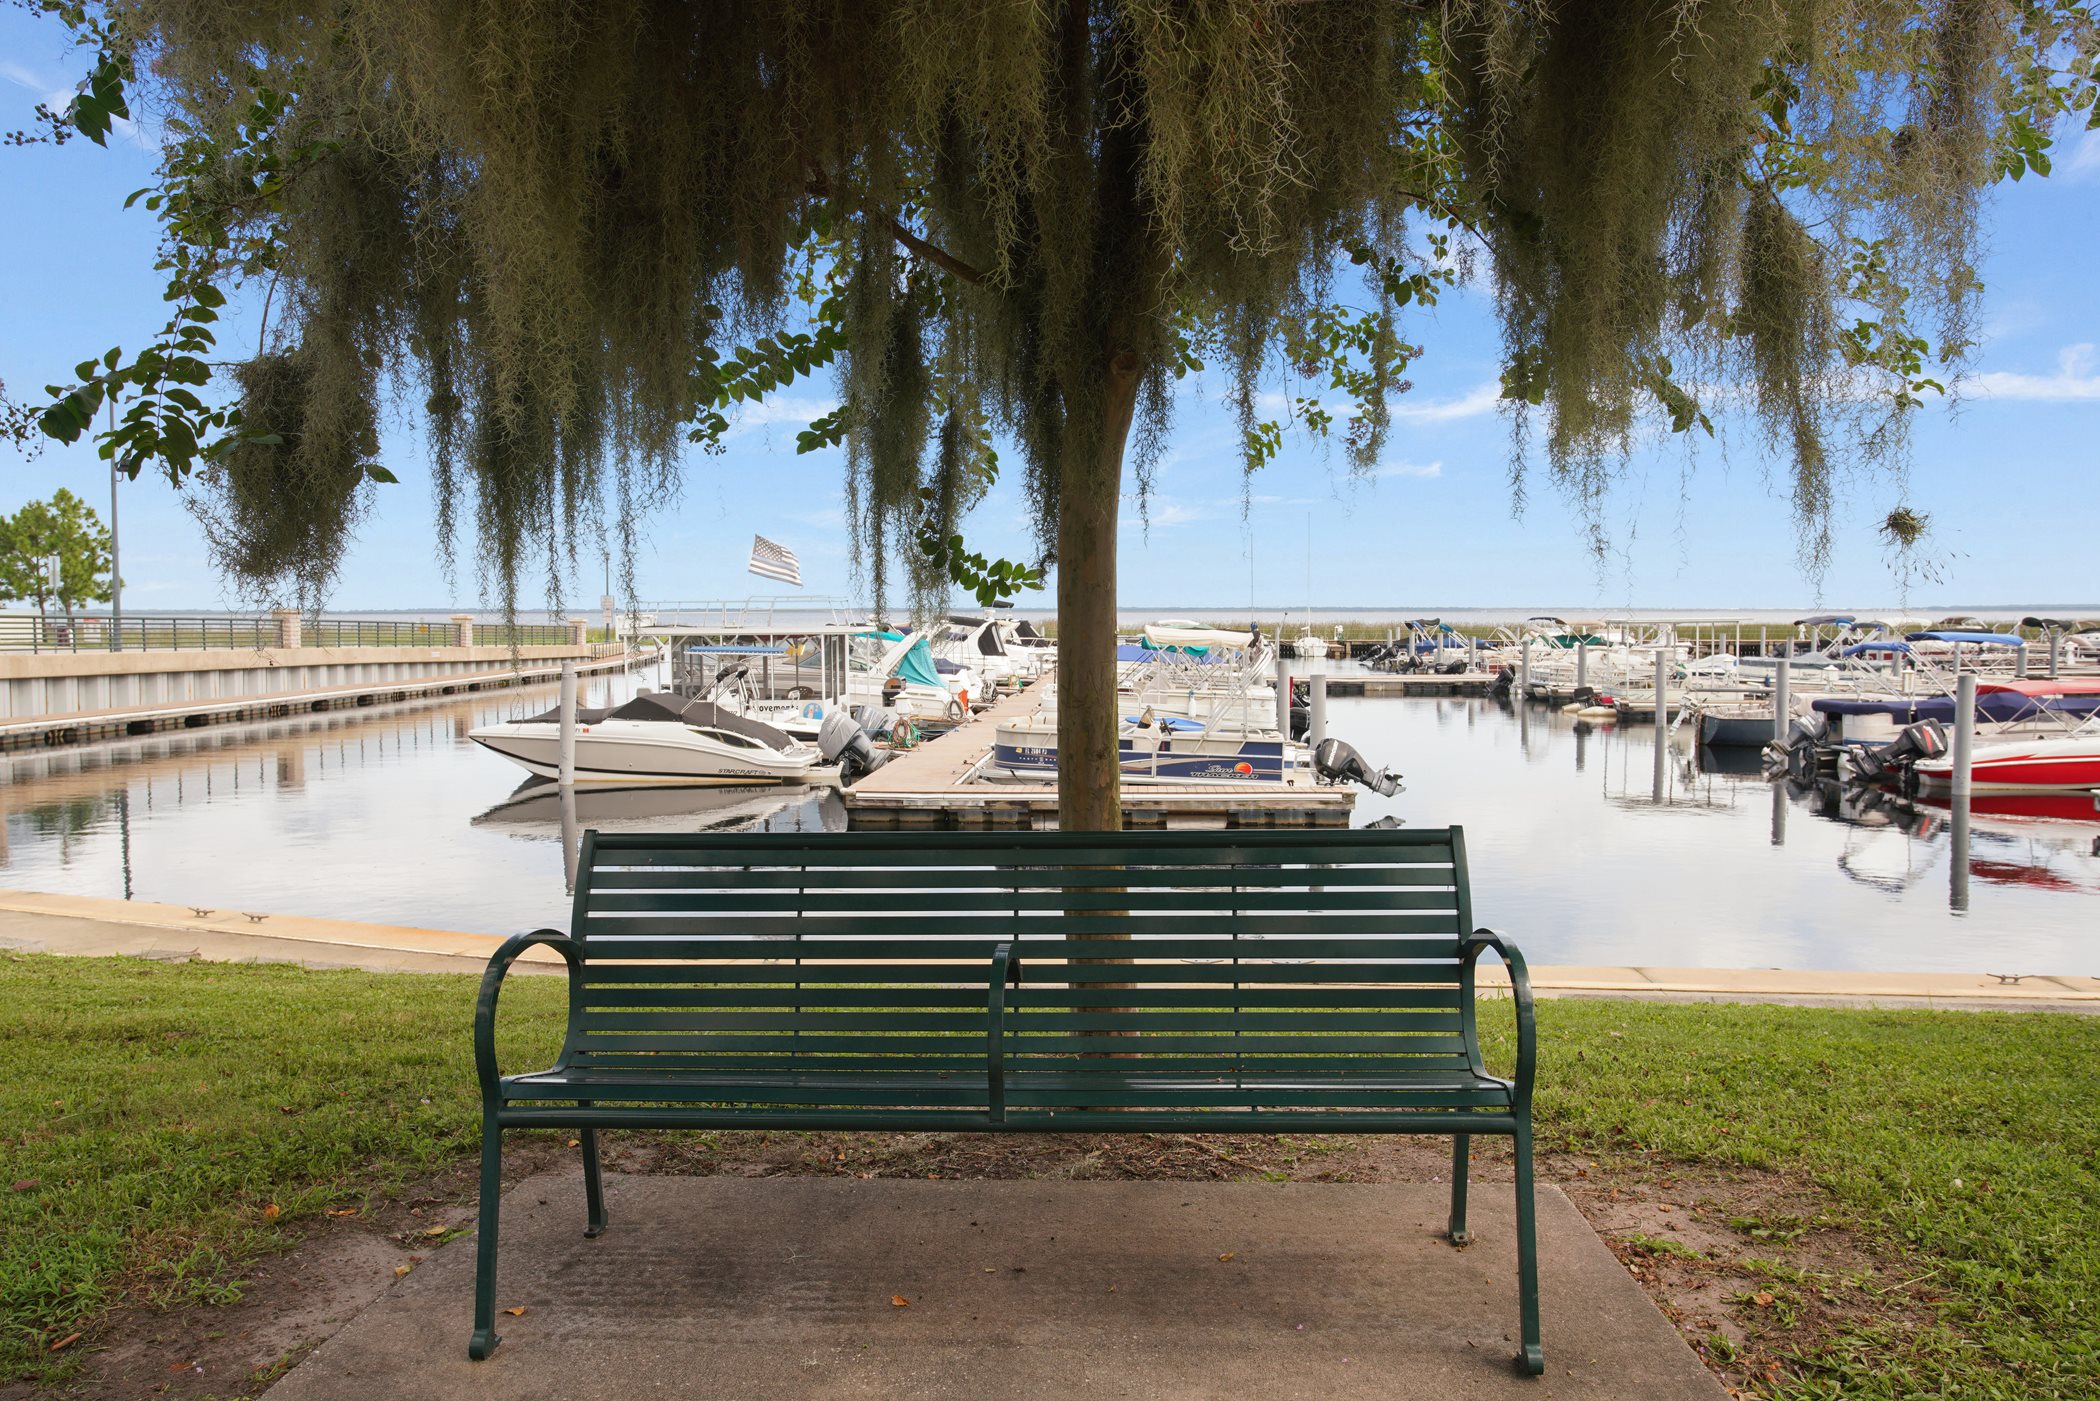 A bench overlooking the beautiful marina and docked boats